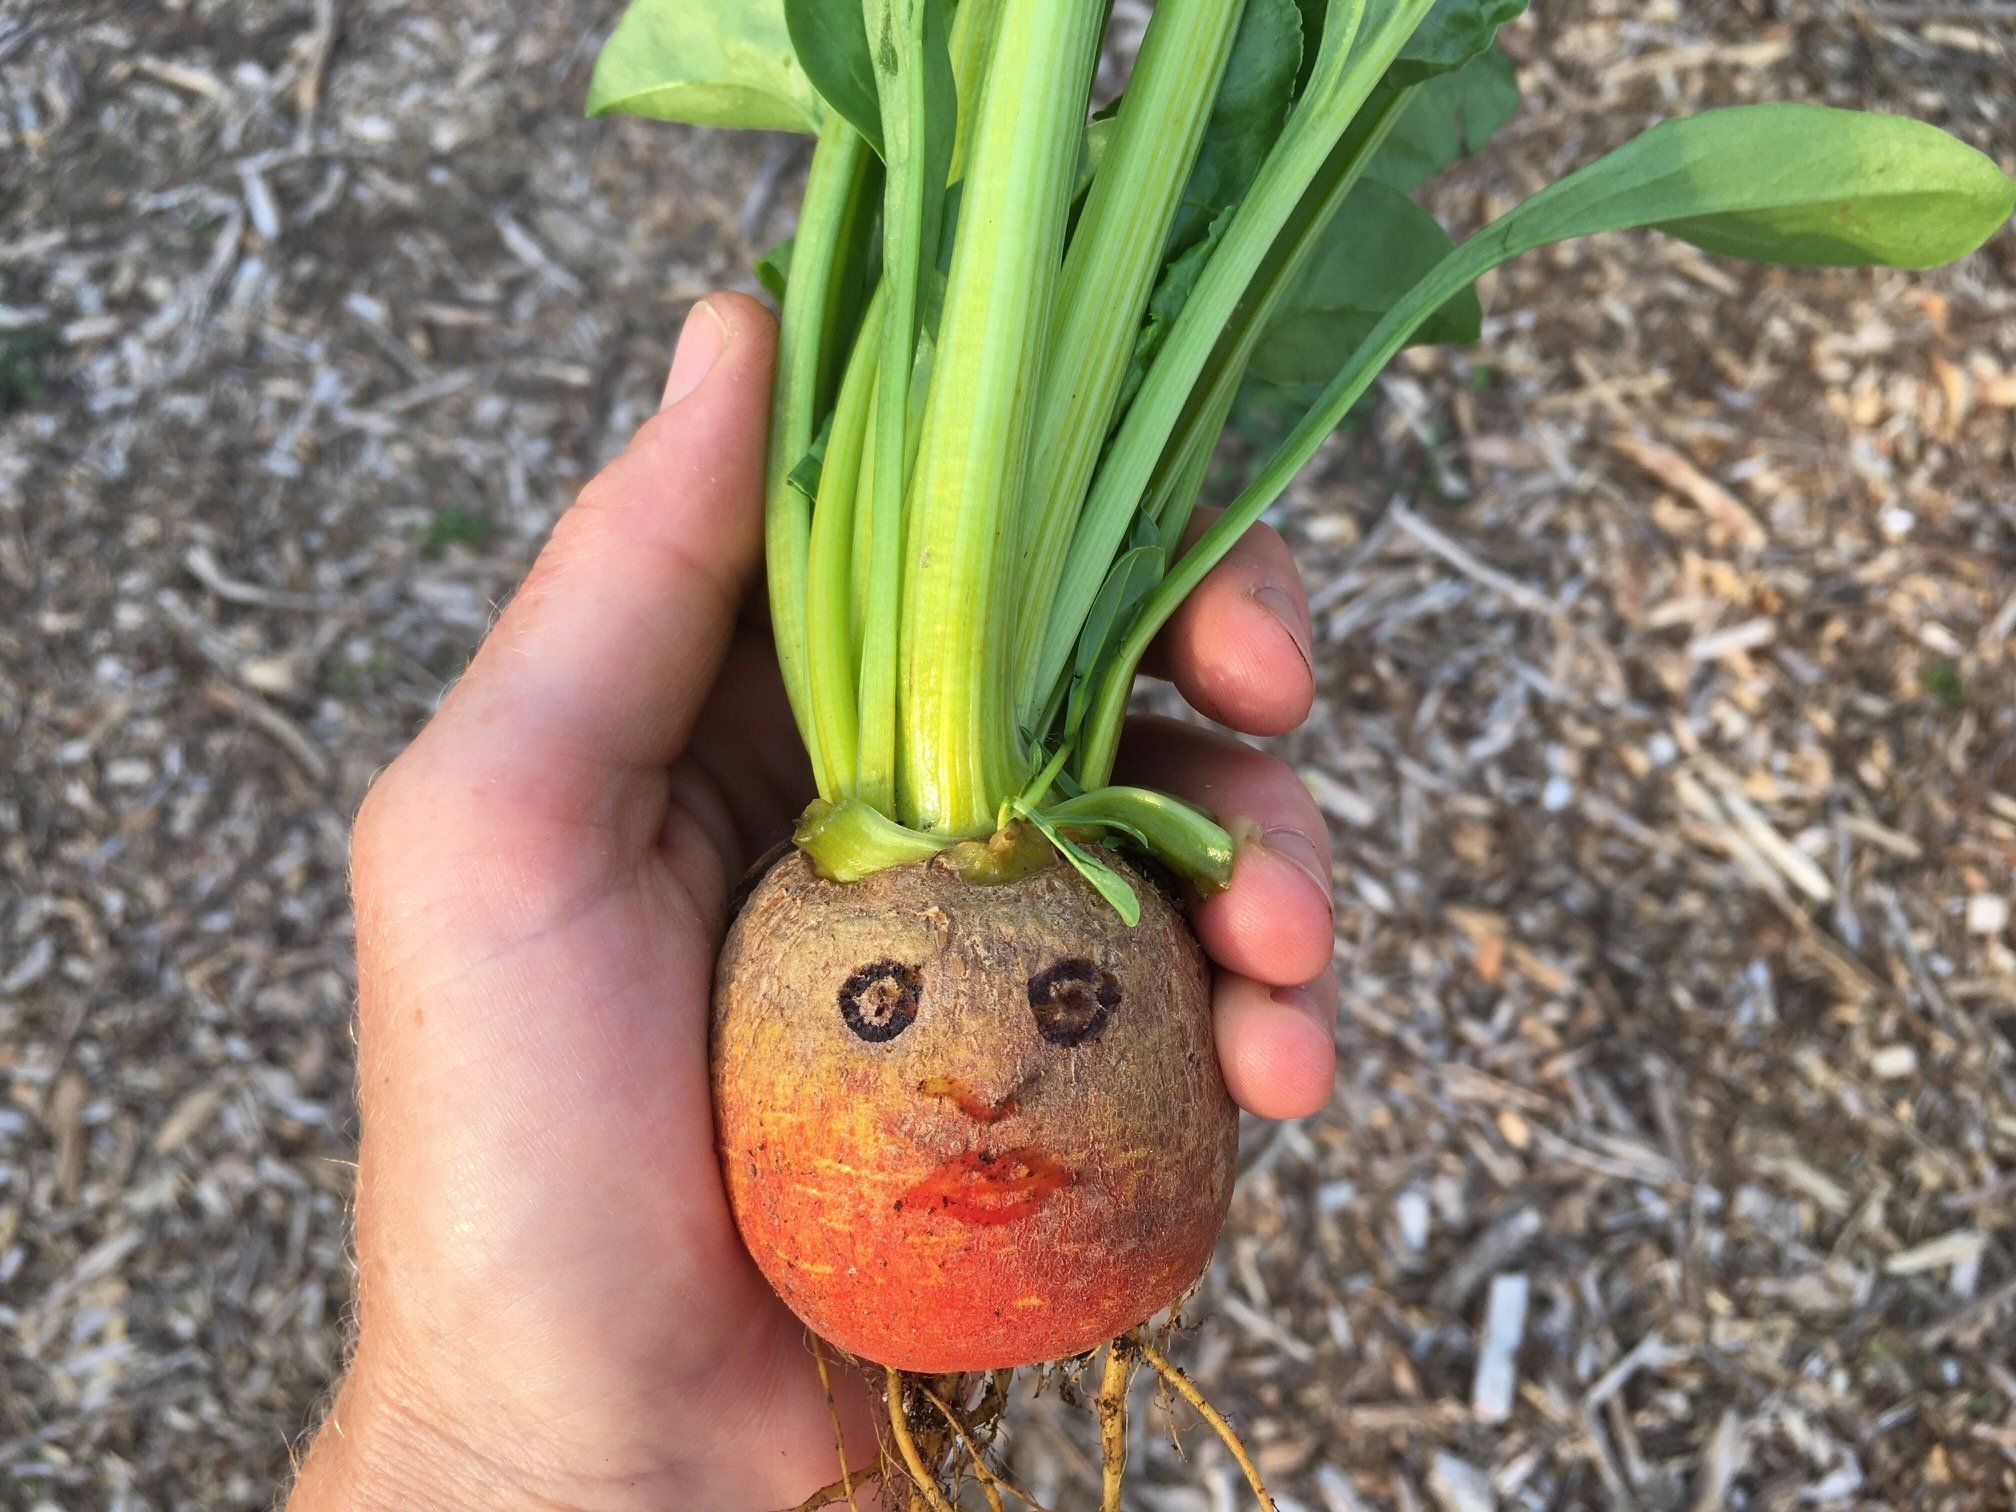 Next Happening: The Veggies are Talking (To Me)